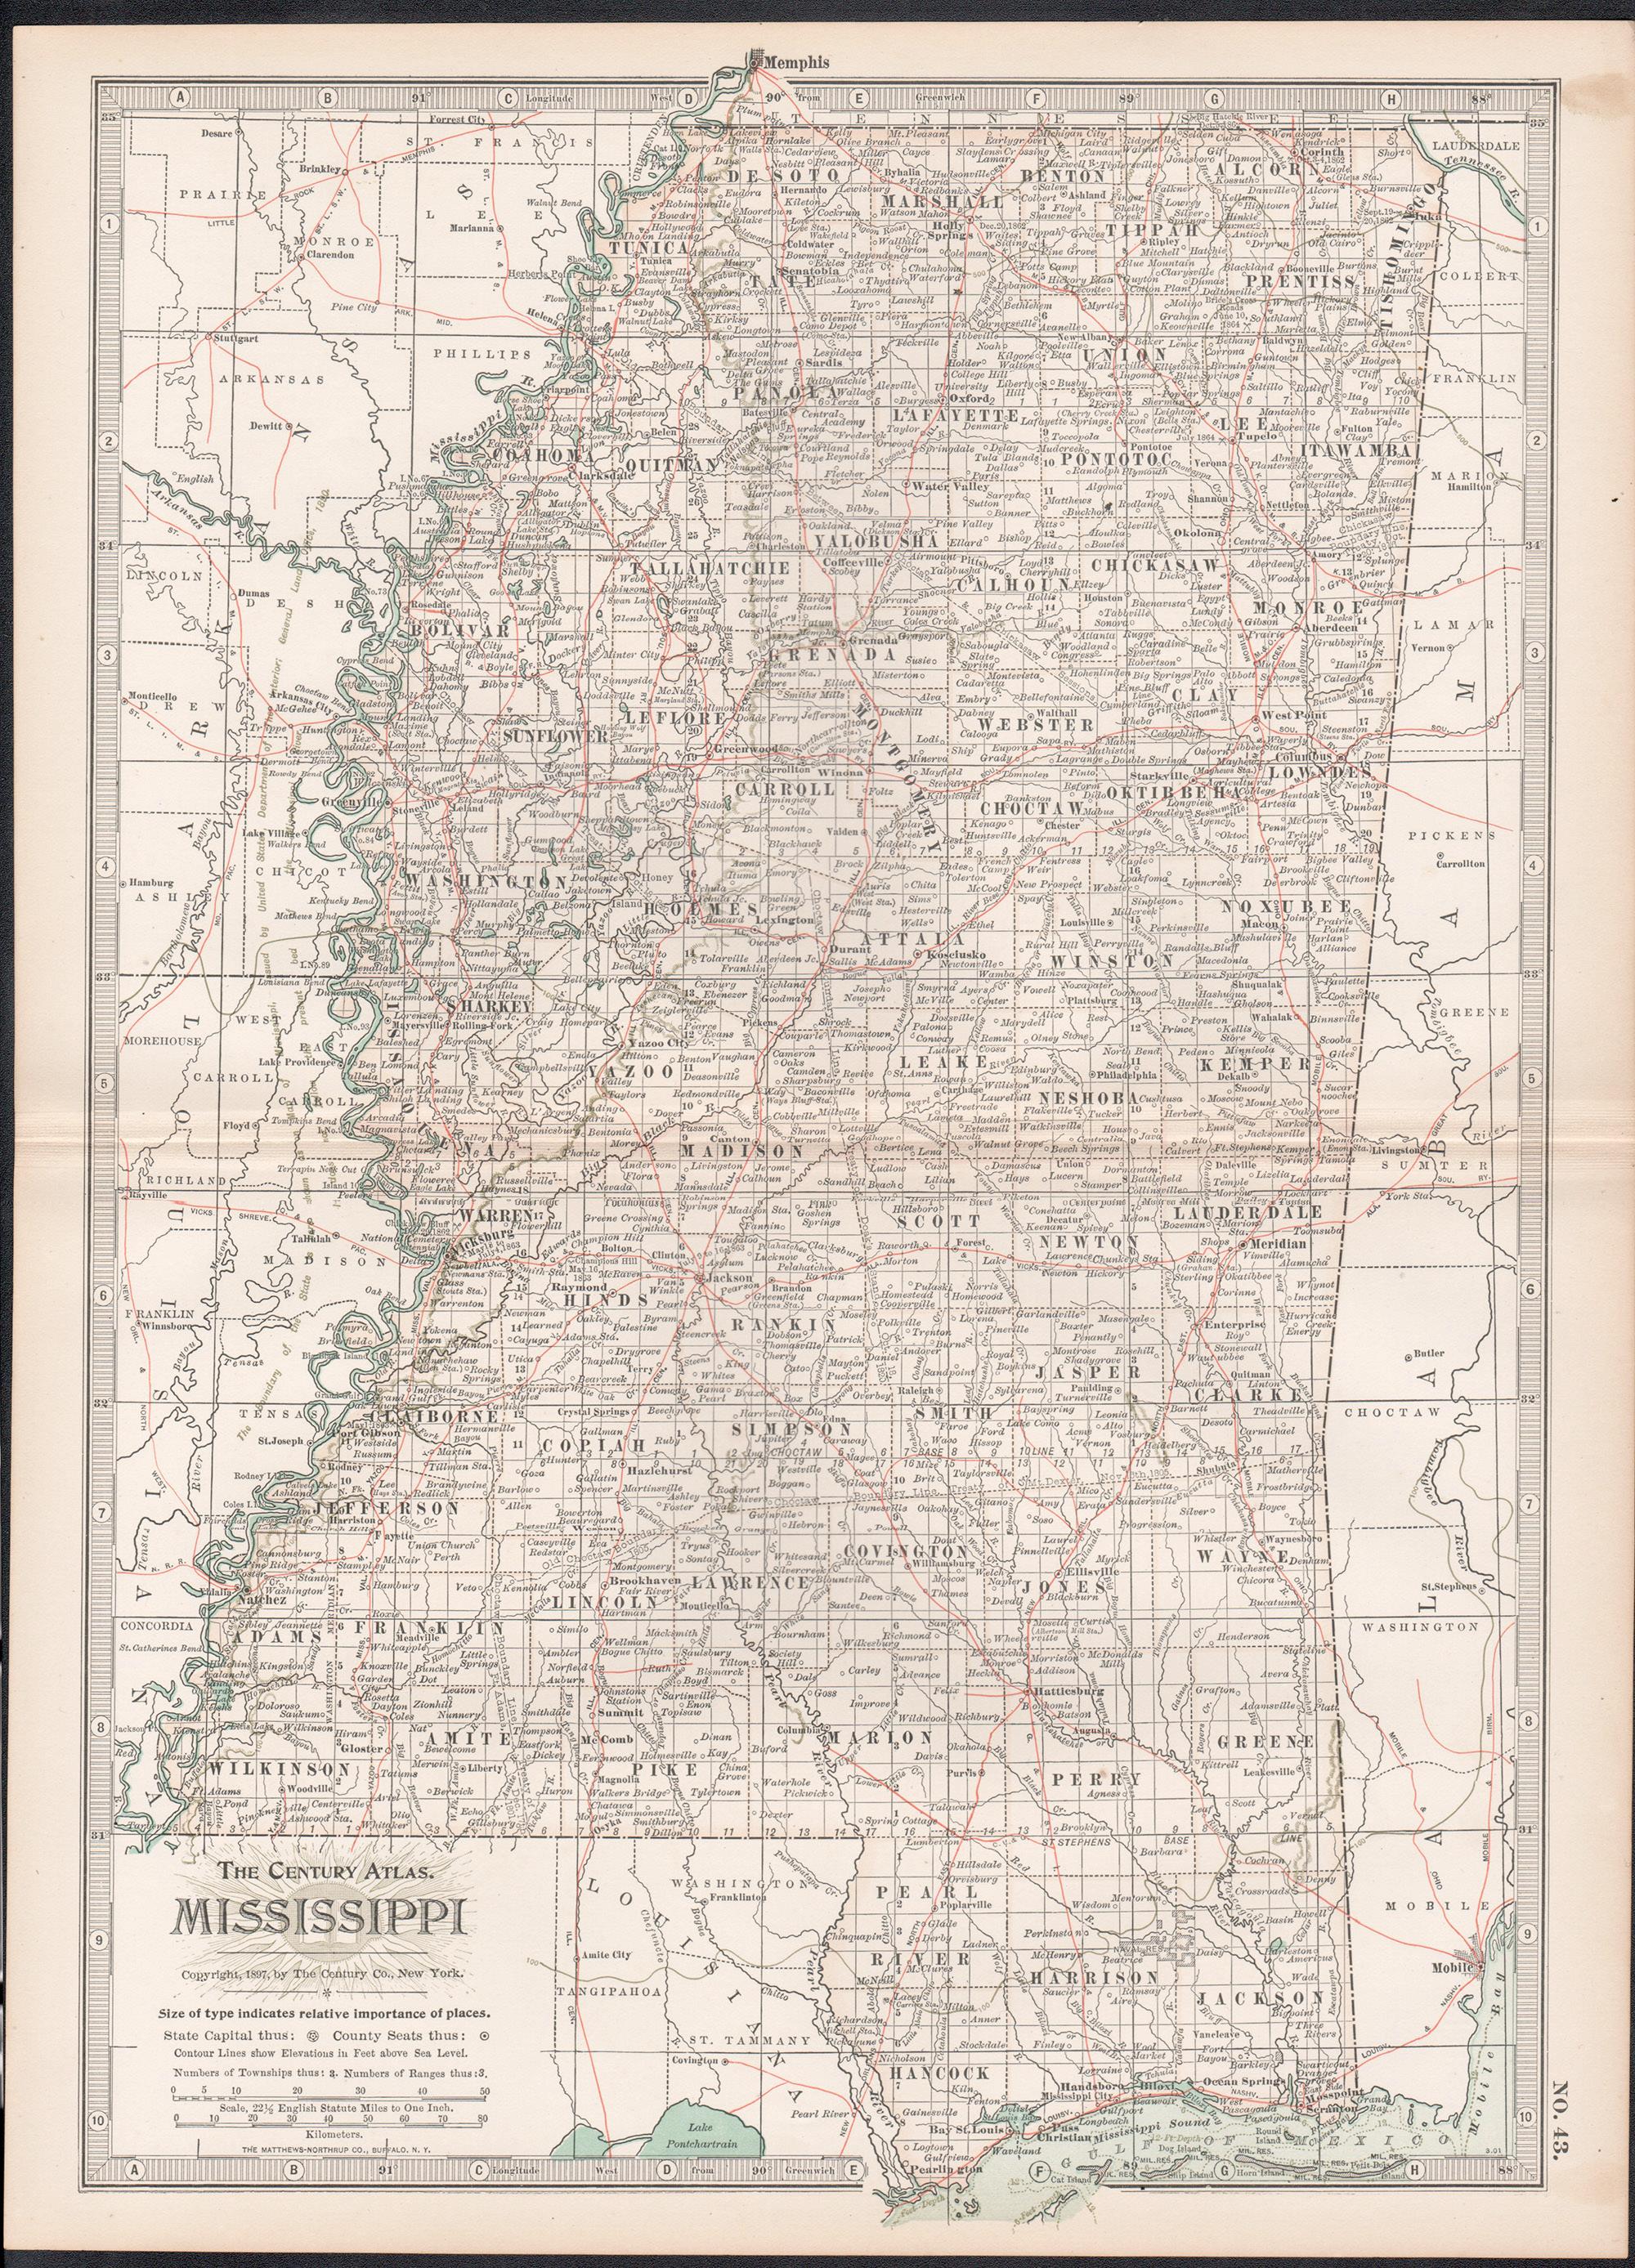 Mississippi. USA Century Atlas state antique vintage map - Print by Unknown